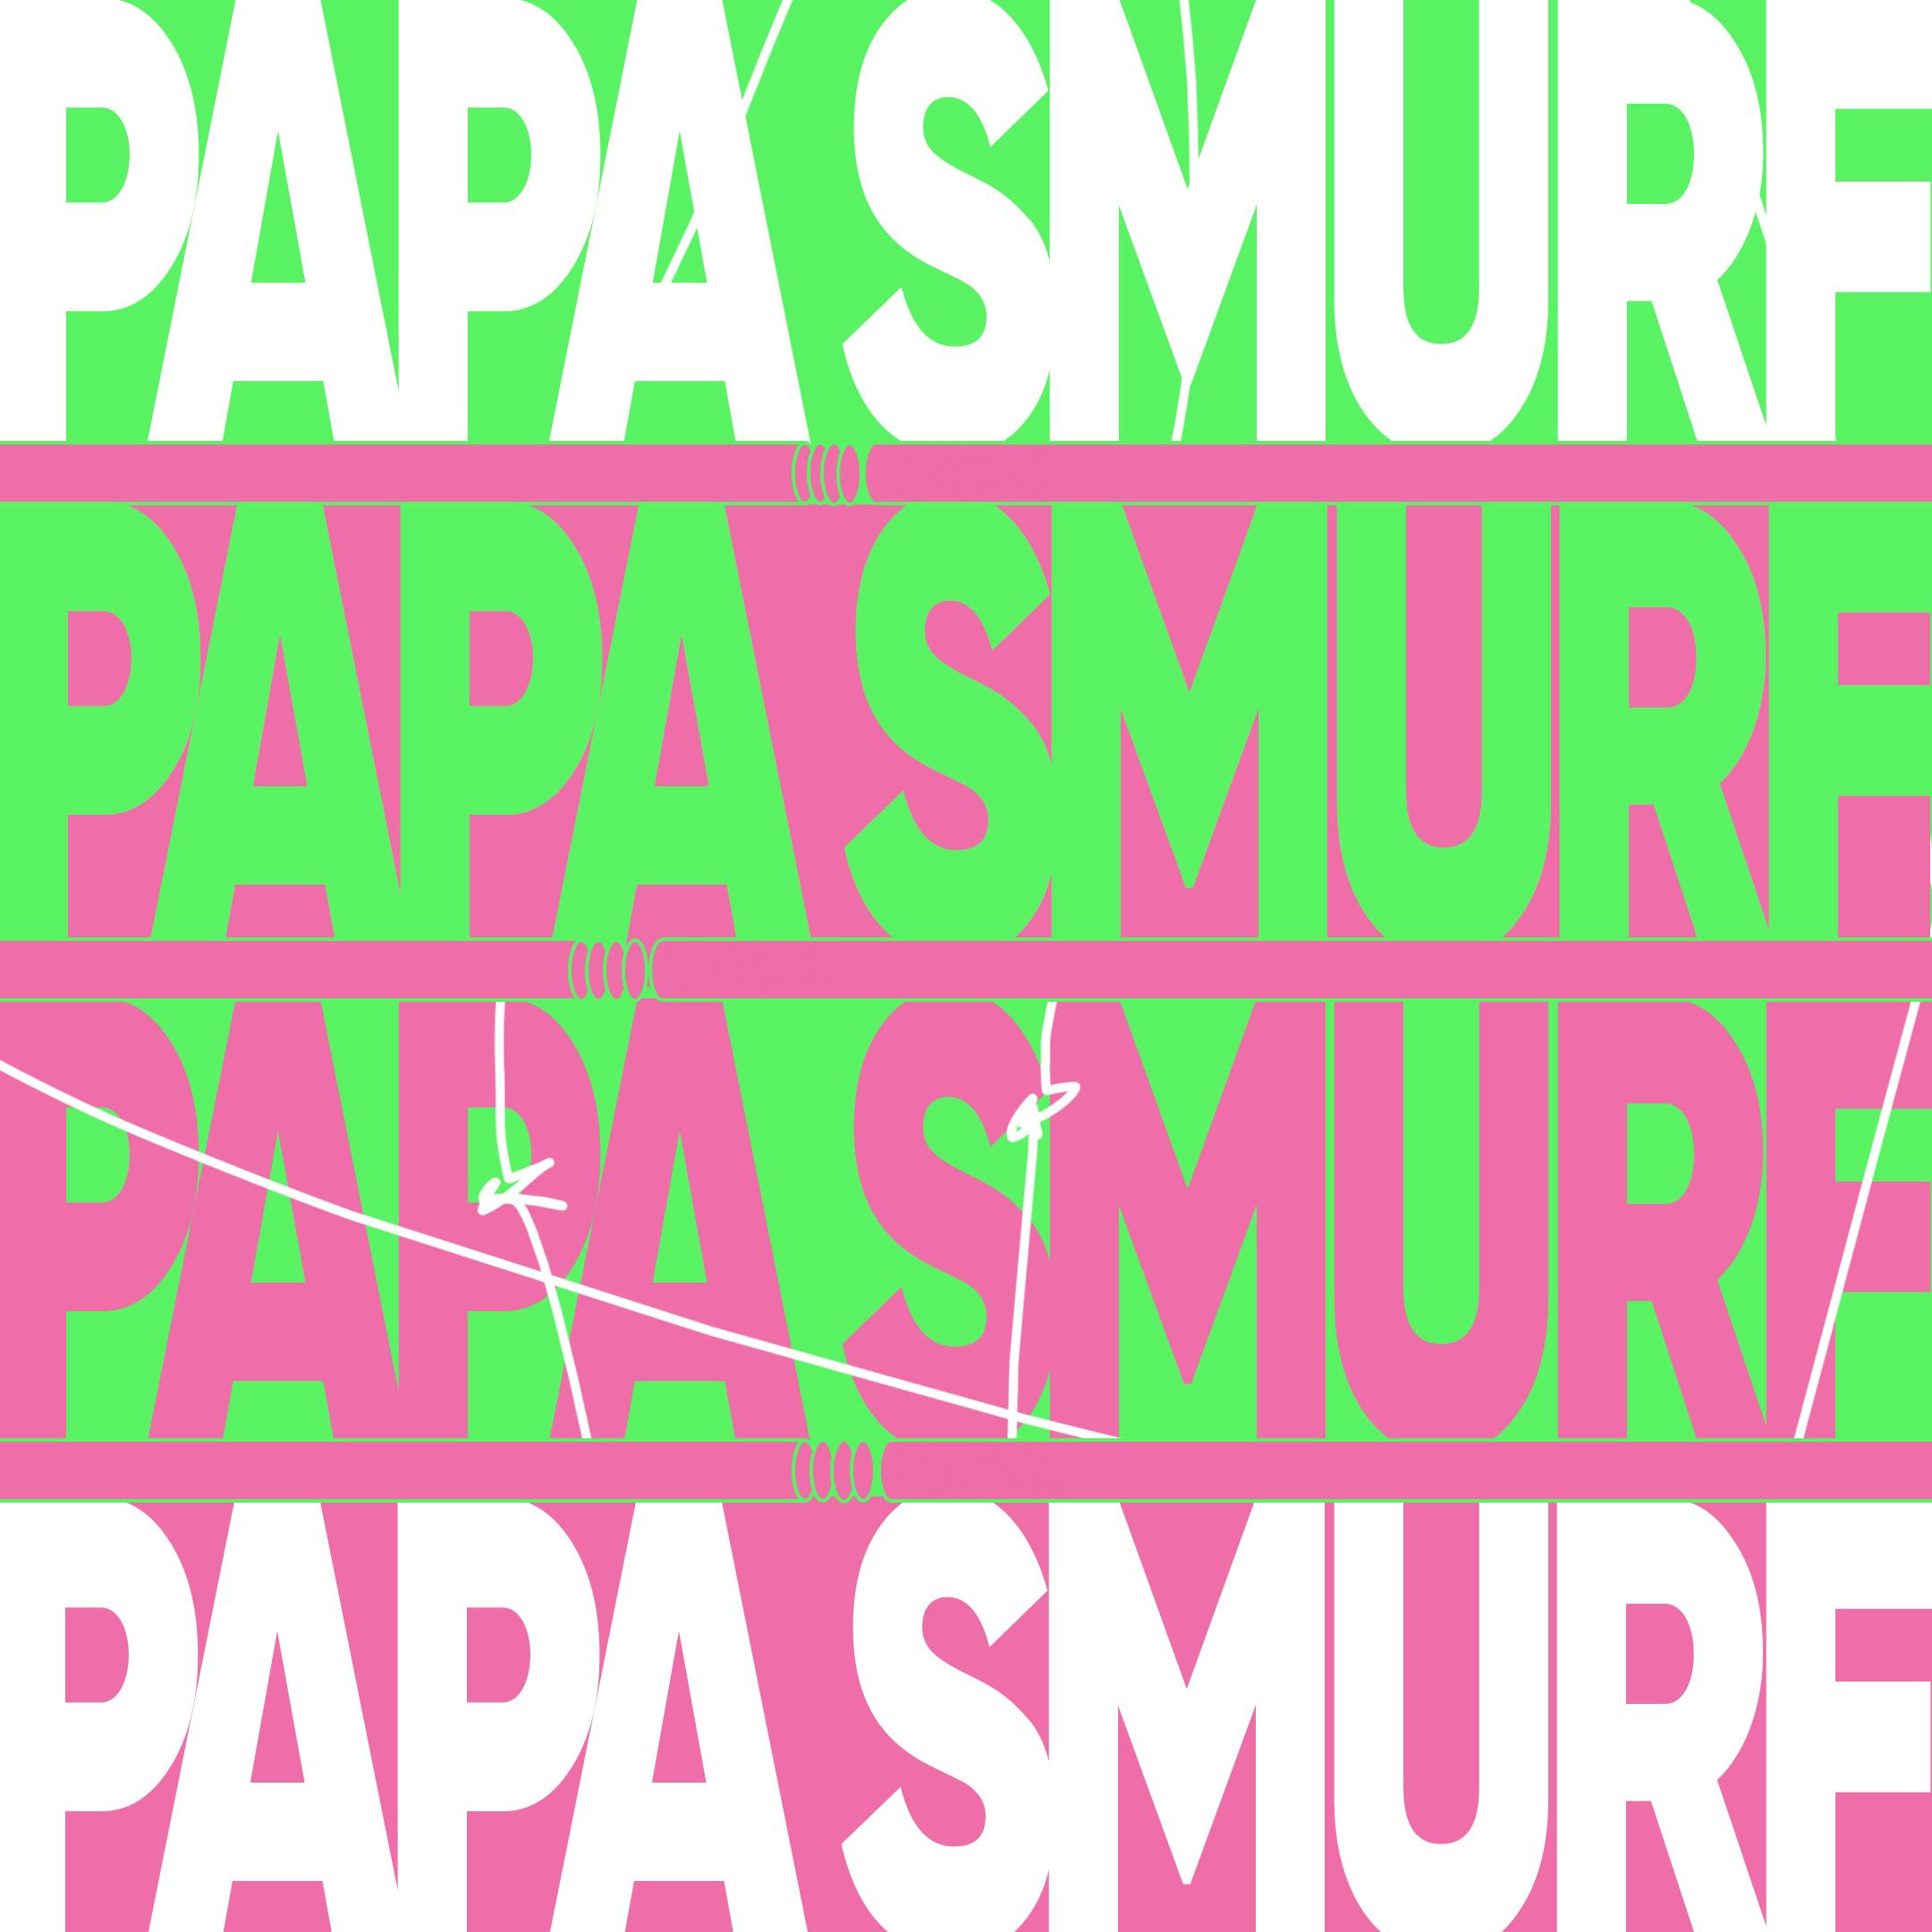  SOLD OUT - Novel Pres. Papa Smurf (3hr 90s Trance Set) - 2nd Show